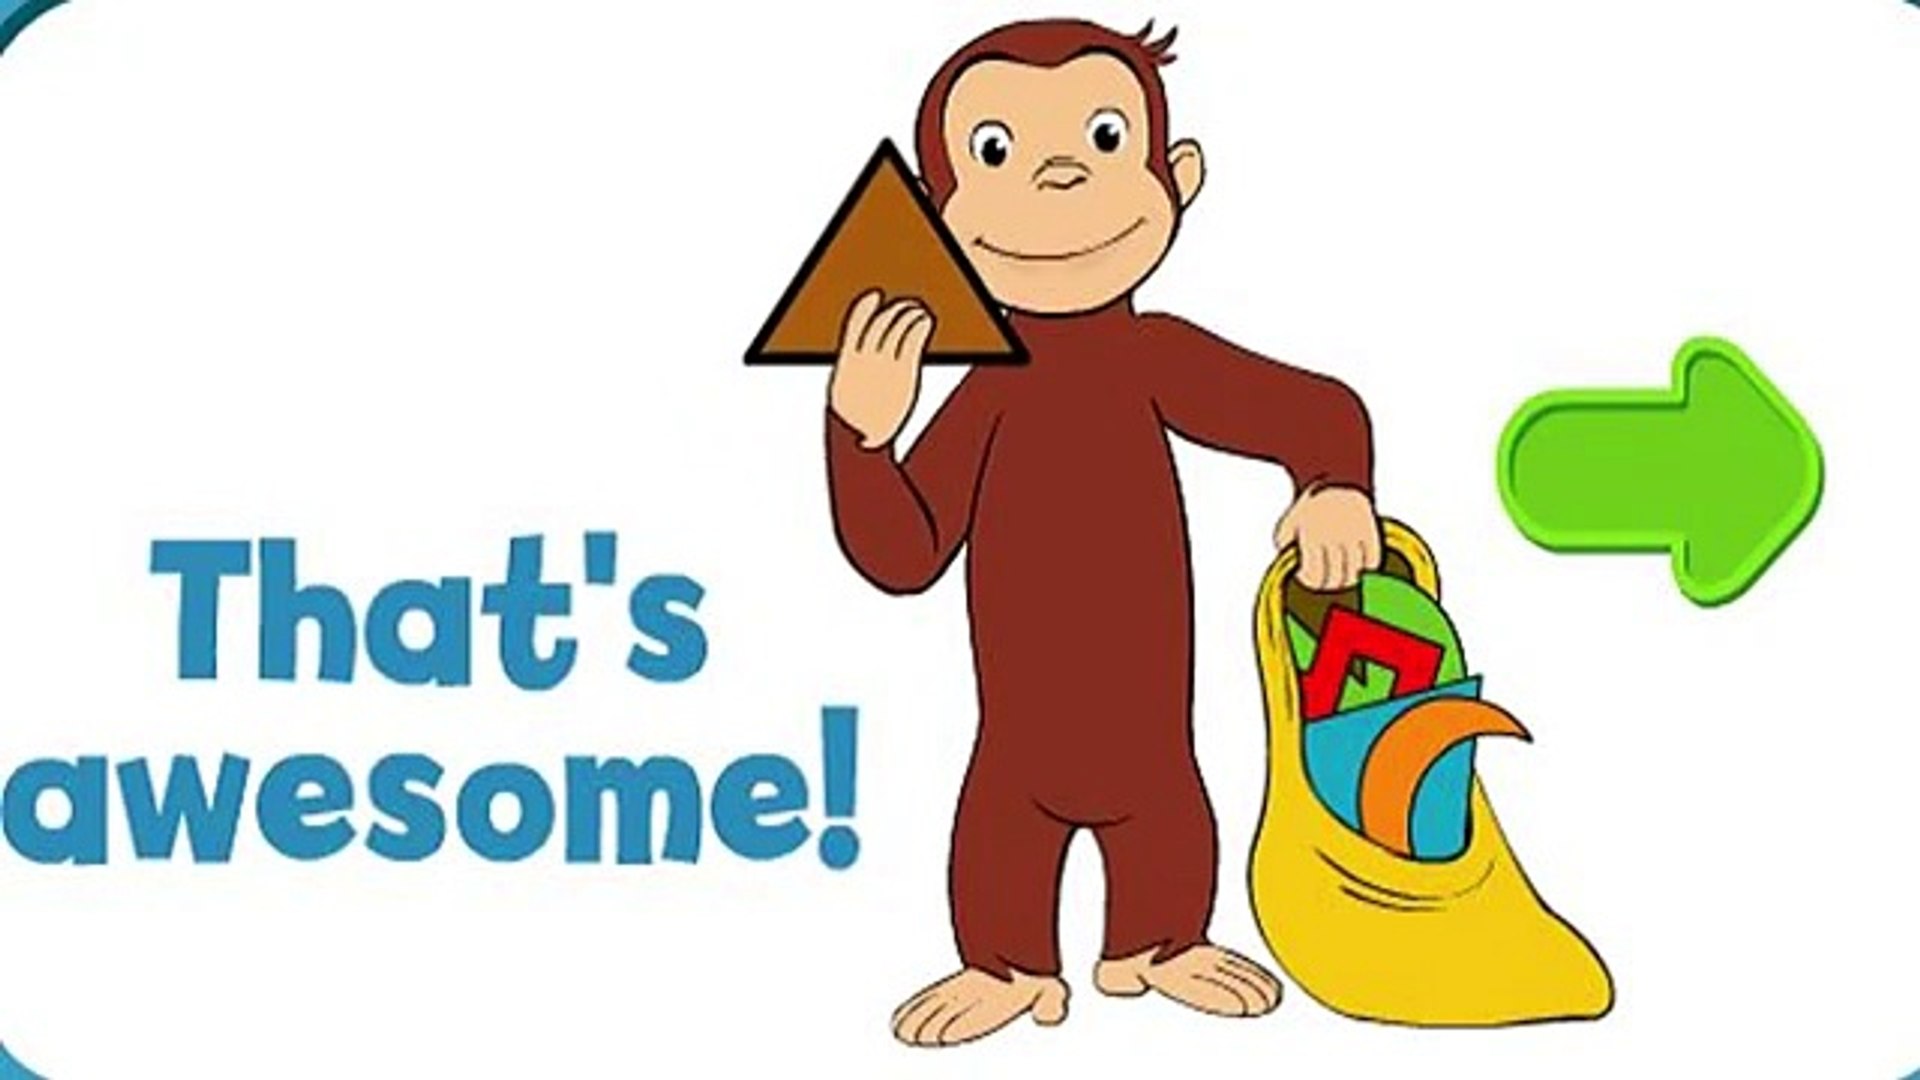 Curious George I Love Shapes For Kids Education Games Videos